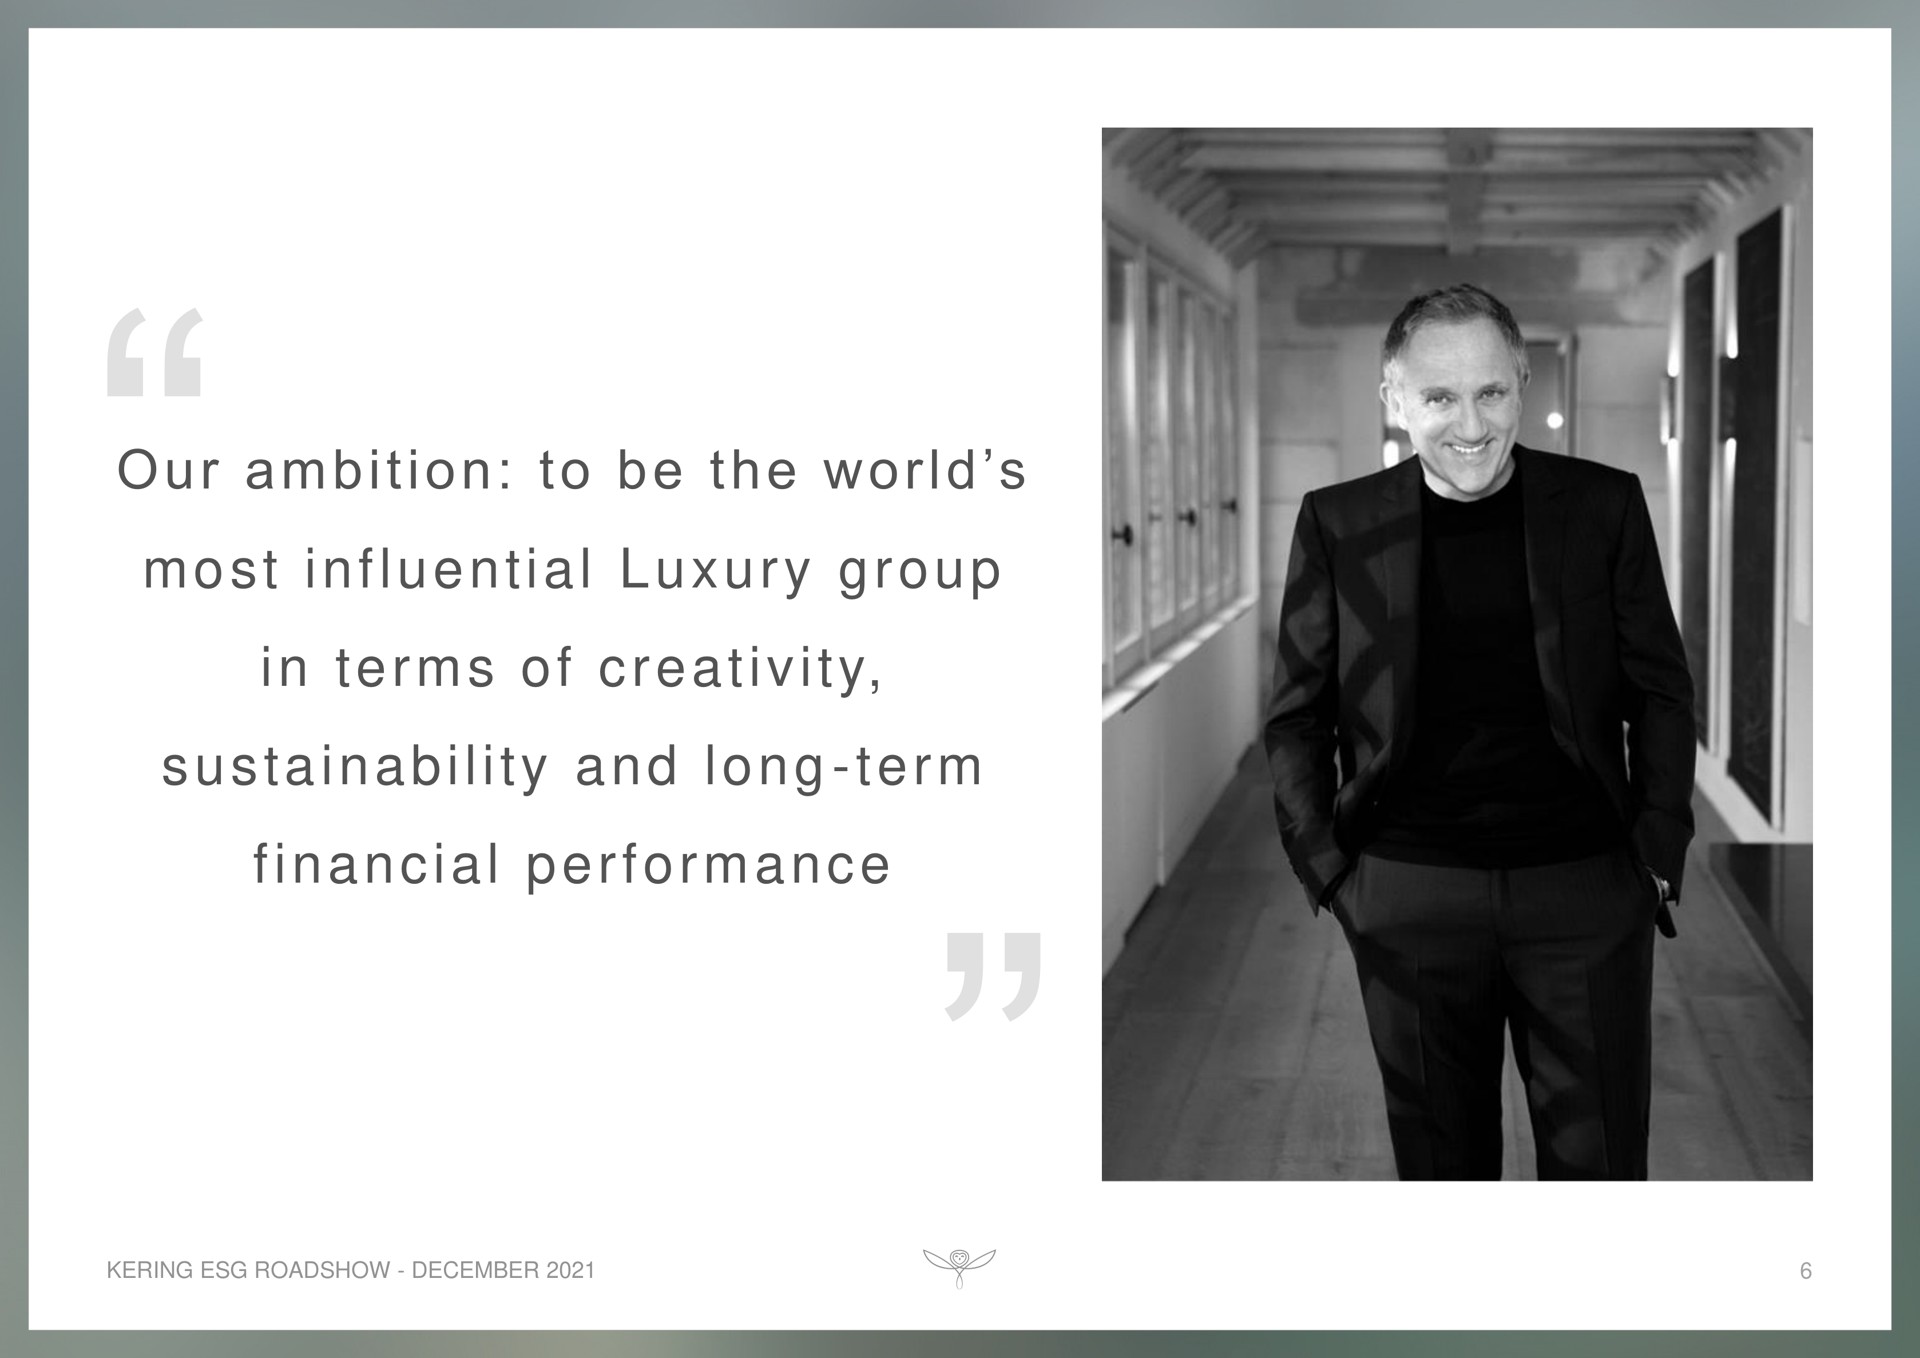 a i i i i a i a i i a i a i i a i a i a a our ambition to be the world most influential luxury group in terms of creativity financial performance and long term | Kering